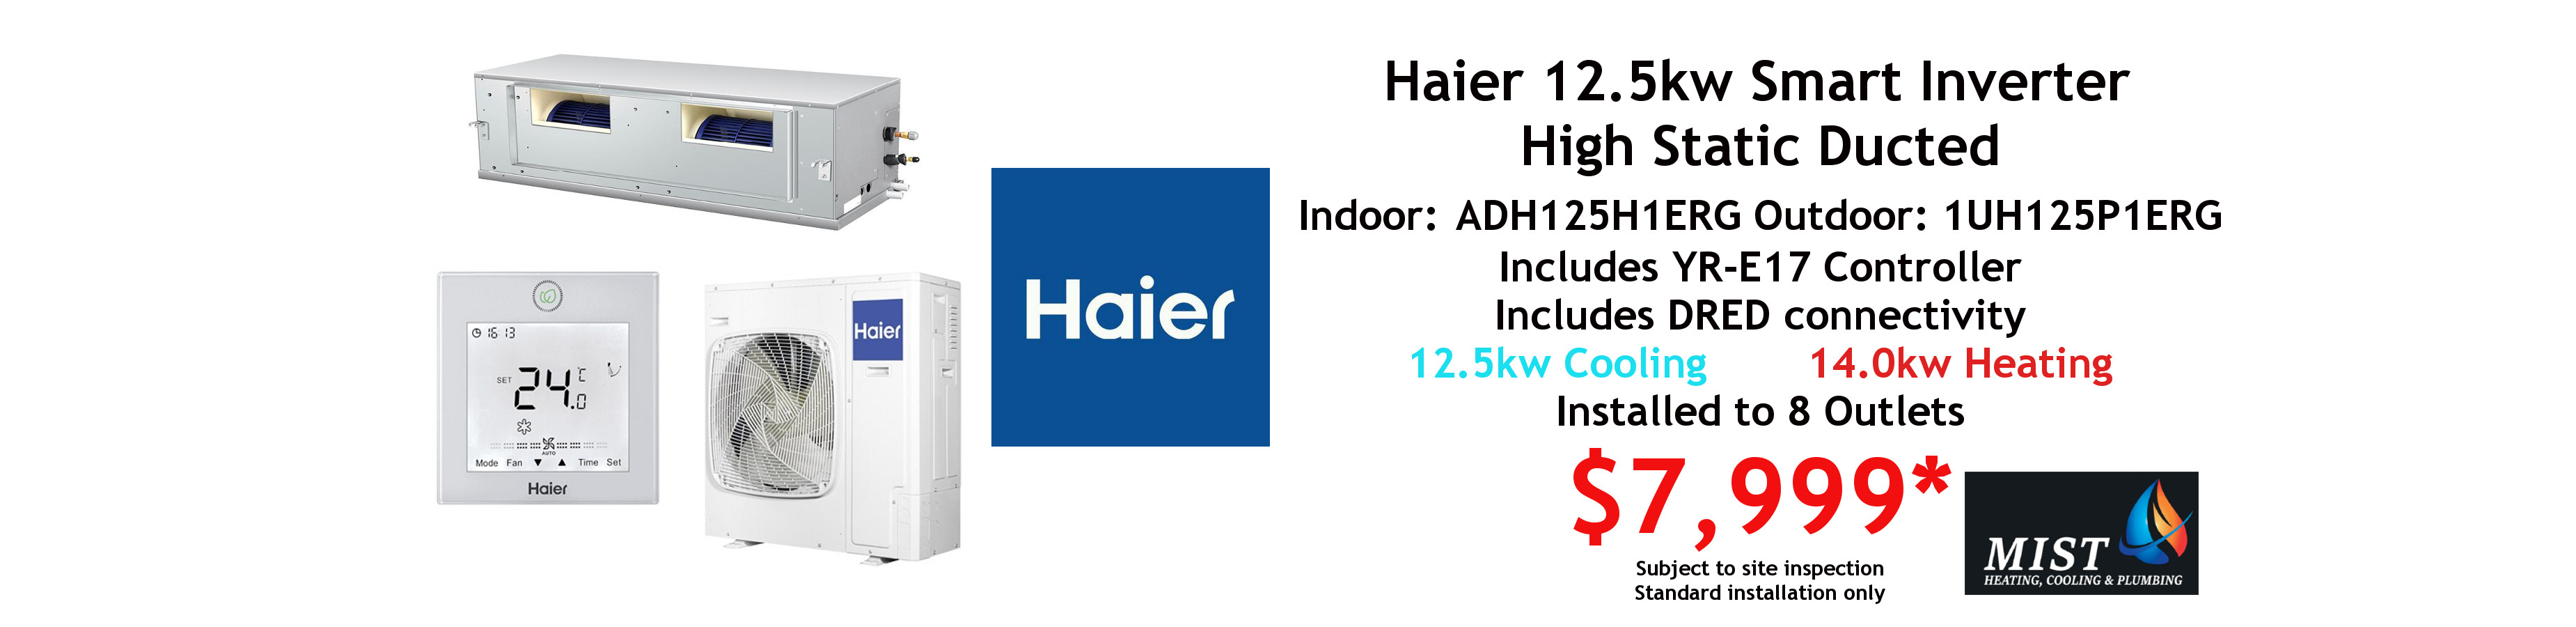 haier 12.5kw ducted special